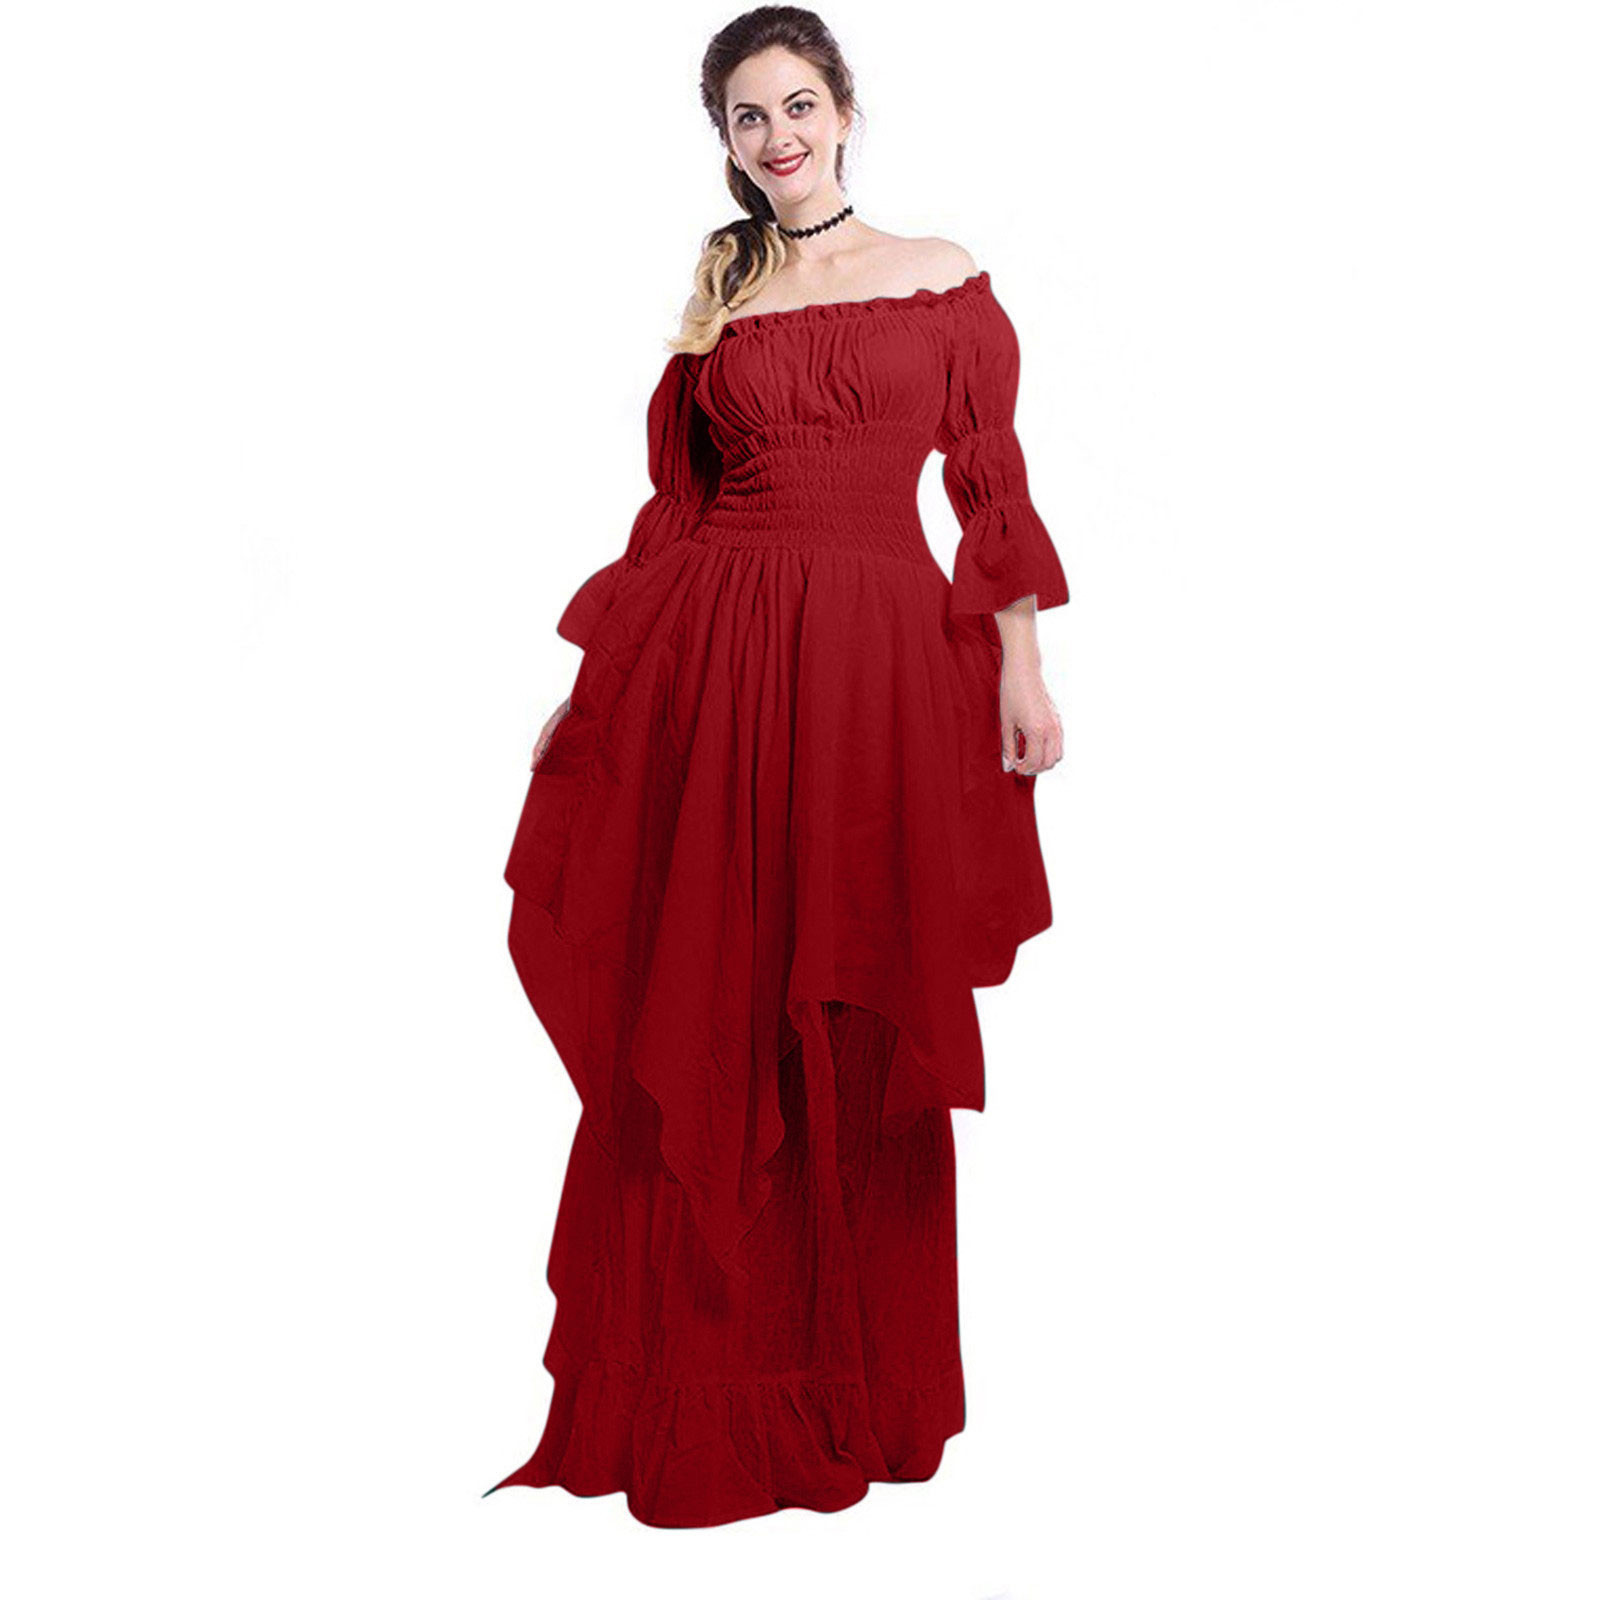 Princessy Pleats Dress Fun With Royal Ruffles Gown Flair red